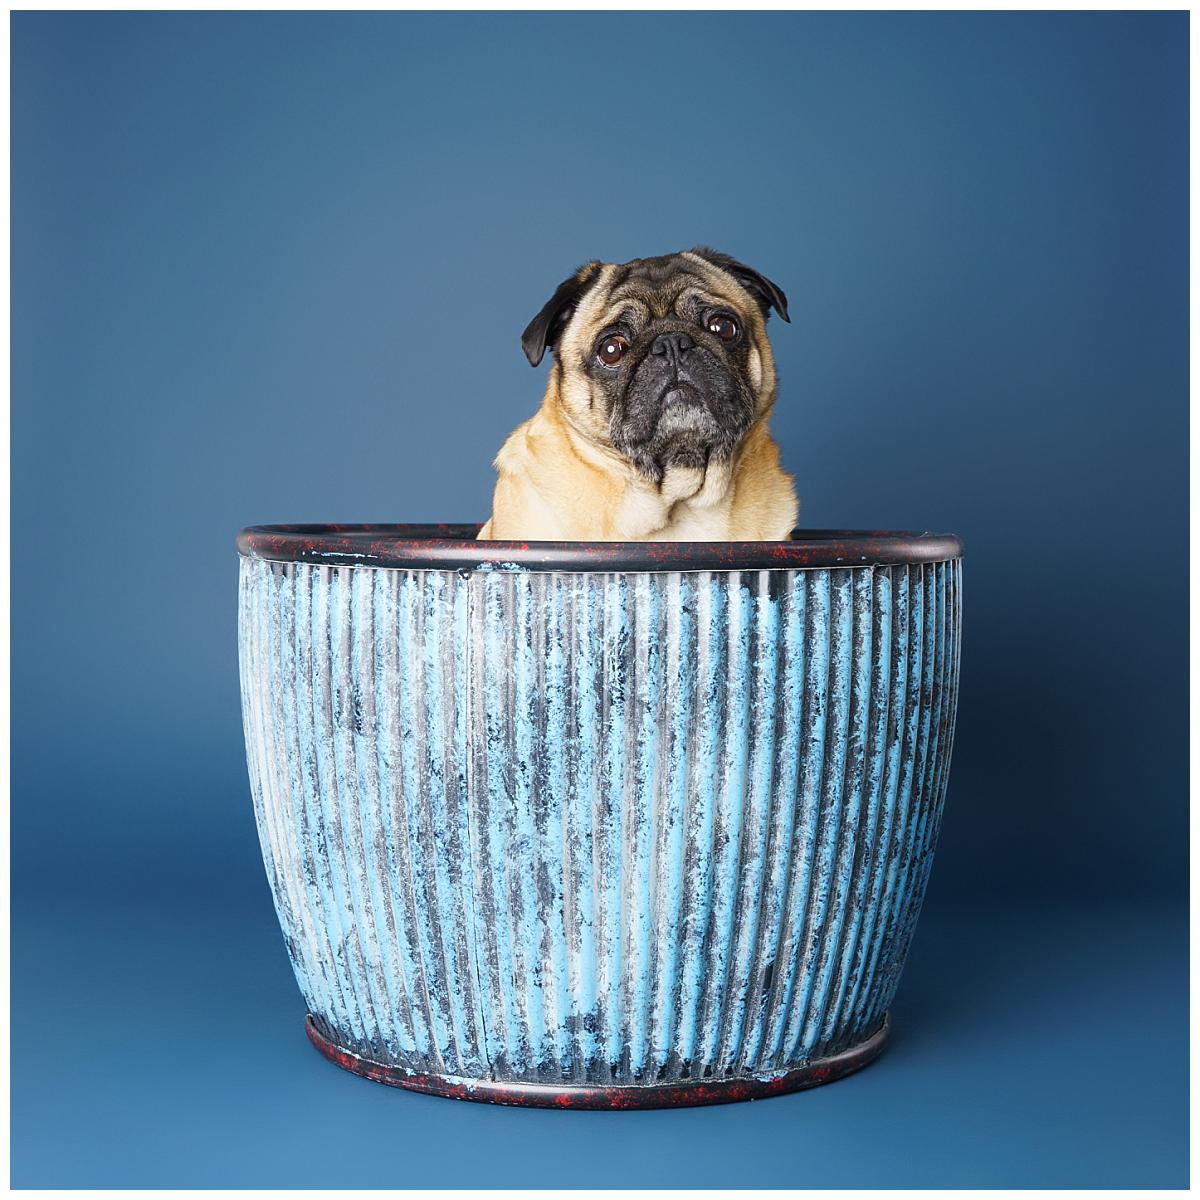 Professional pet photograph, taken by Northern Ireland's top pet photographer in Belfast of Pug in a tub  on a blue backdrop